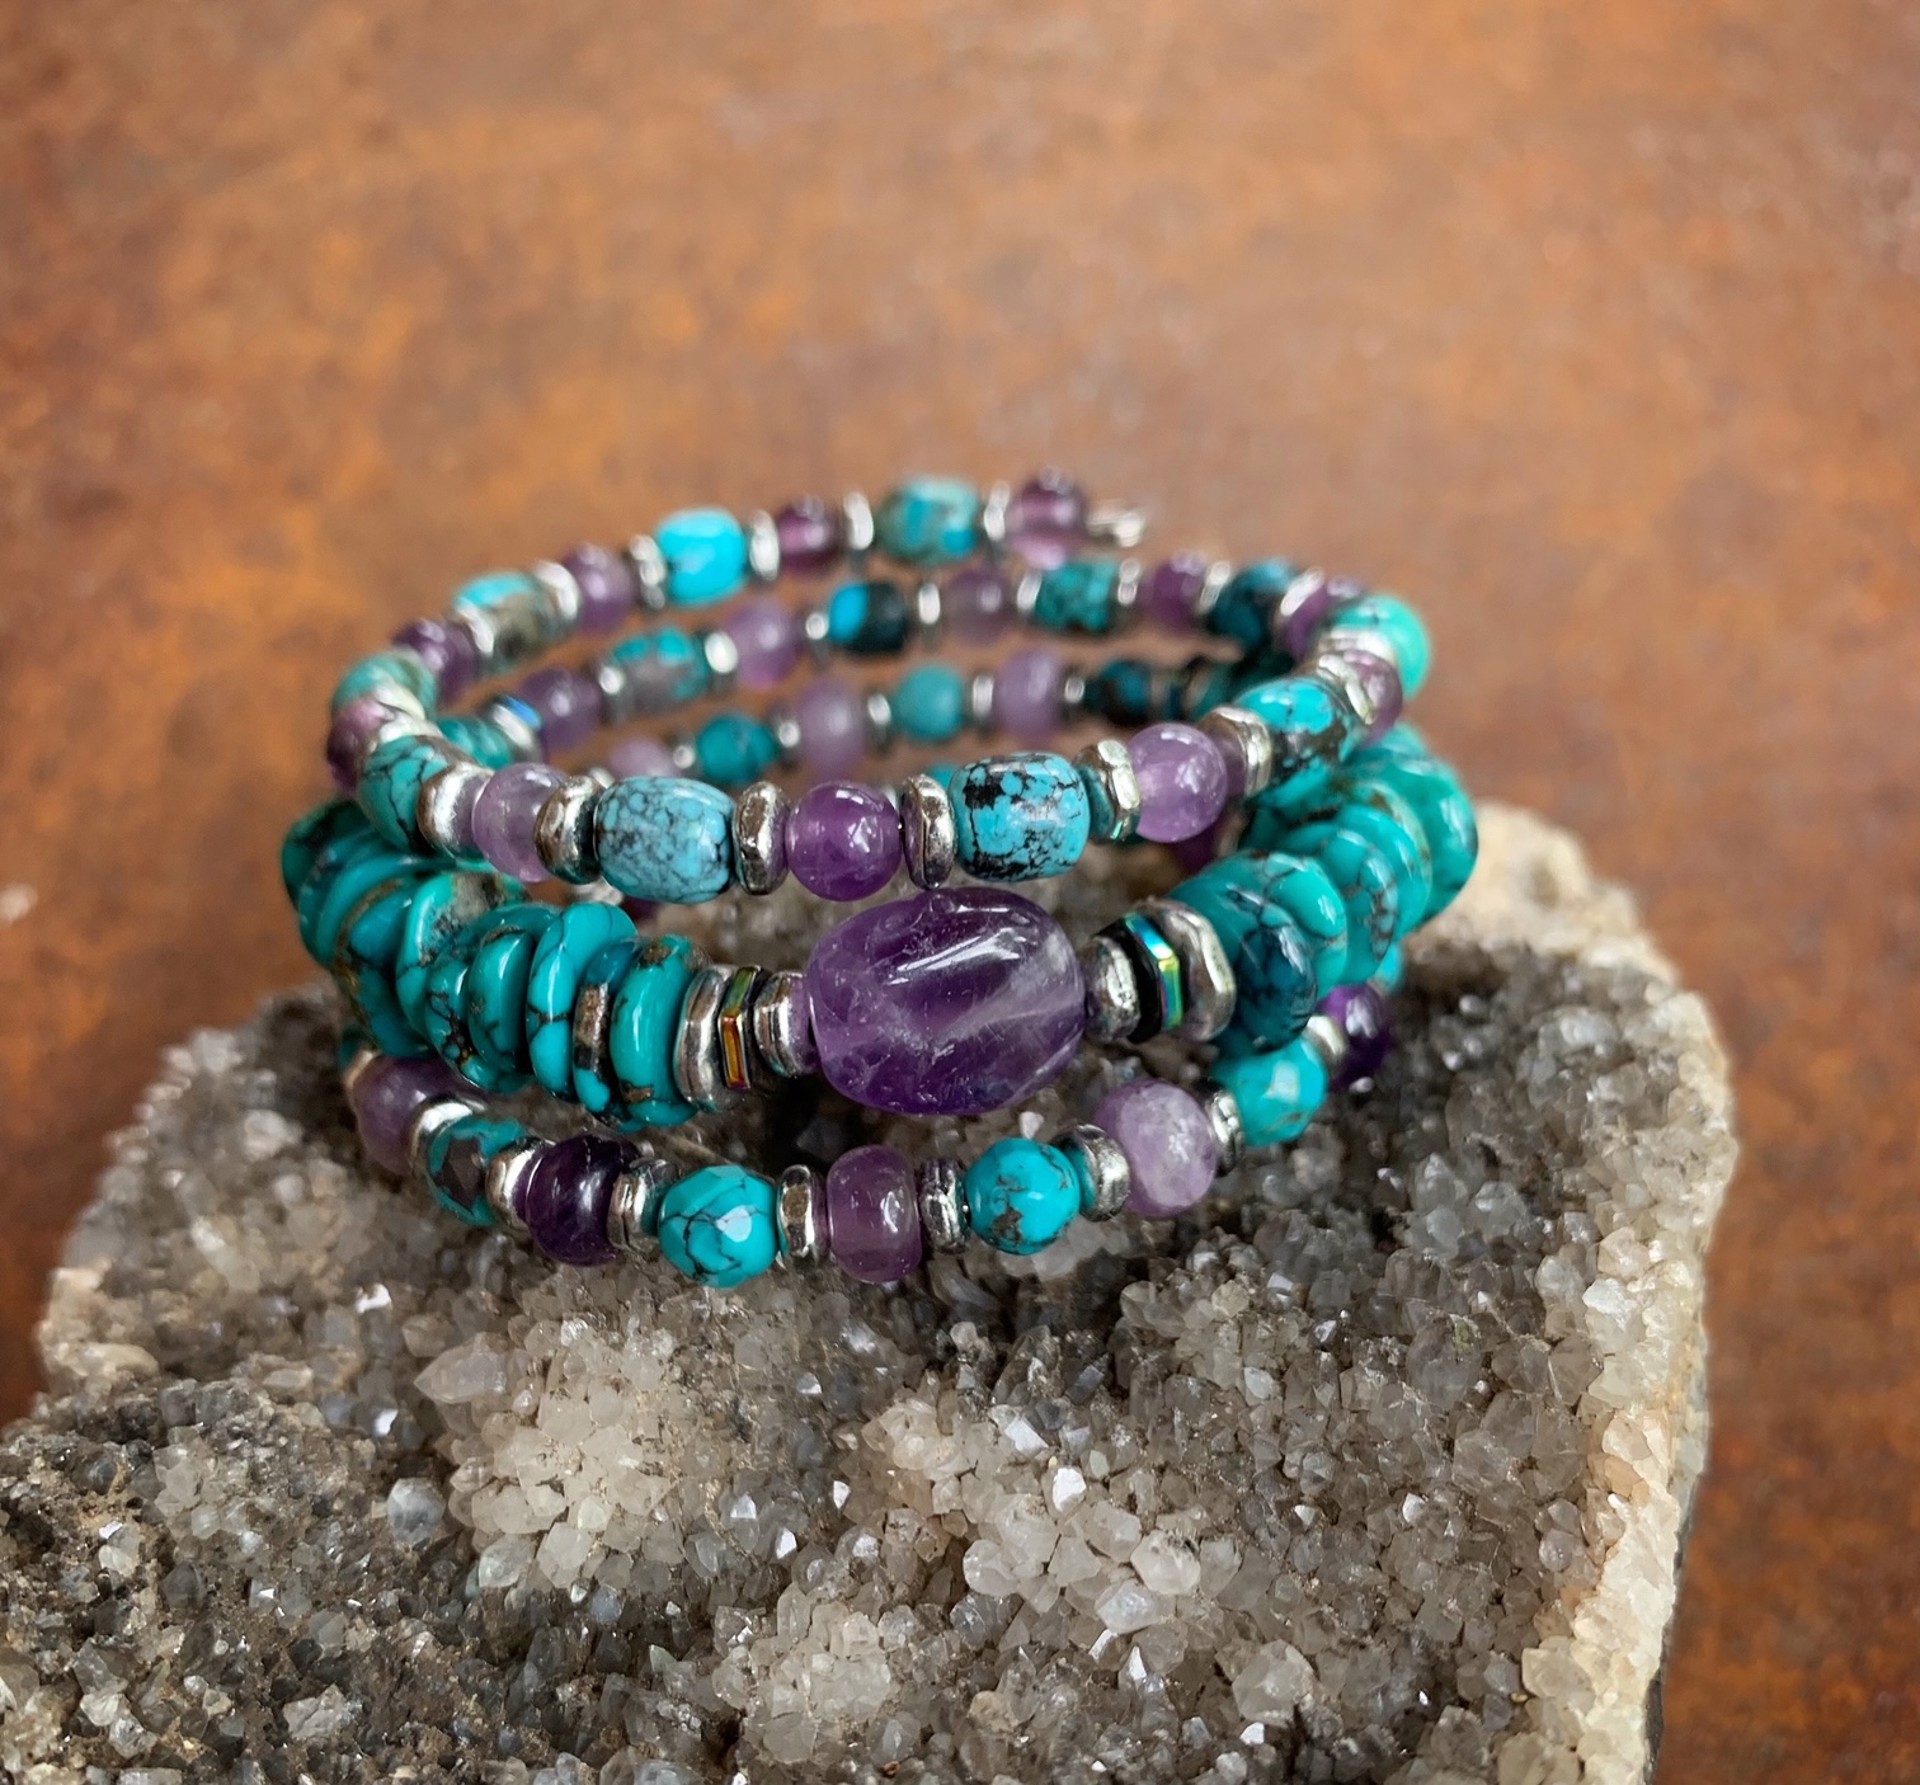 K865 Turquoise and Amethyst Wrap Bracelet by Kelly Ormsby